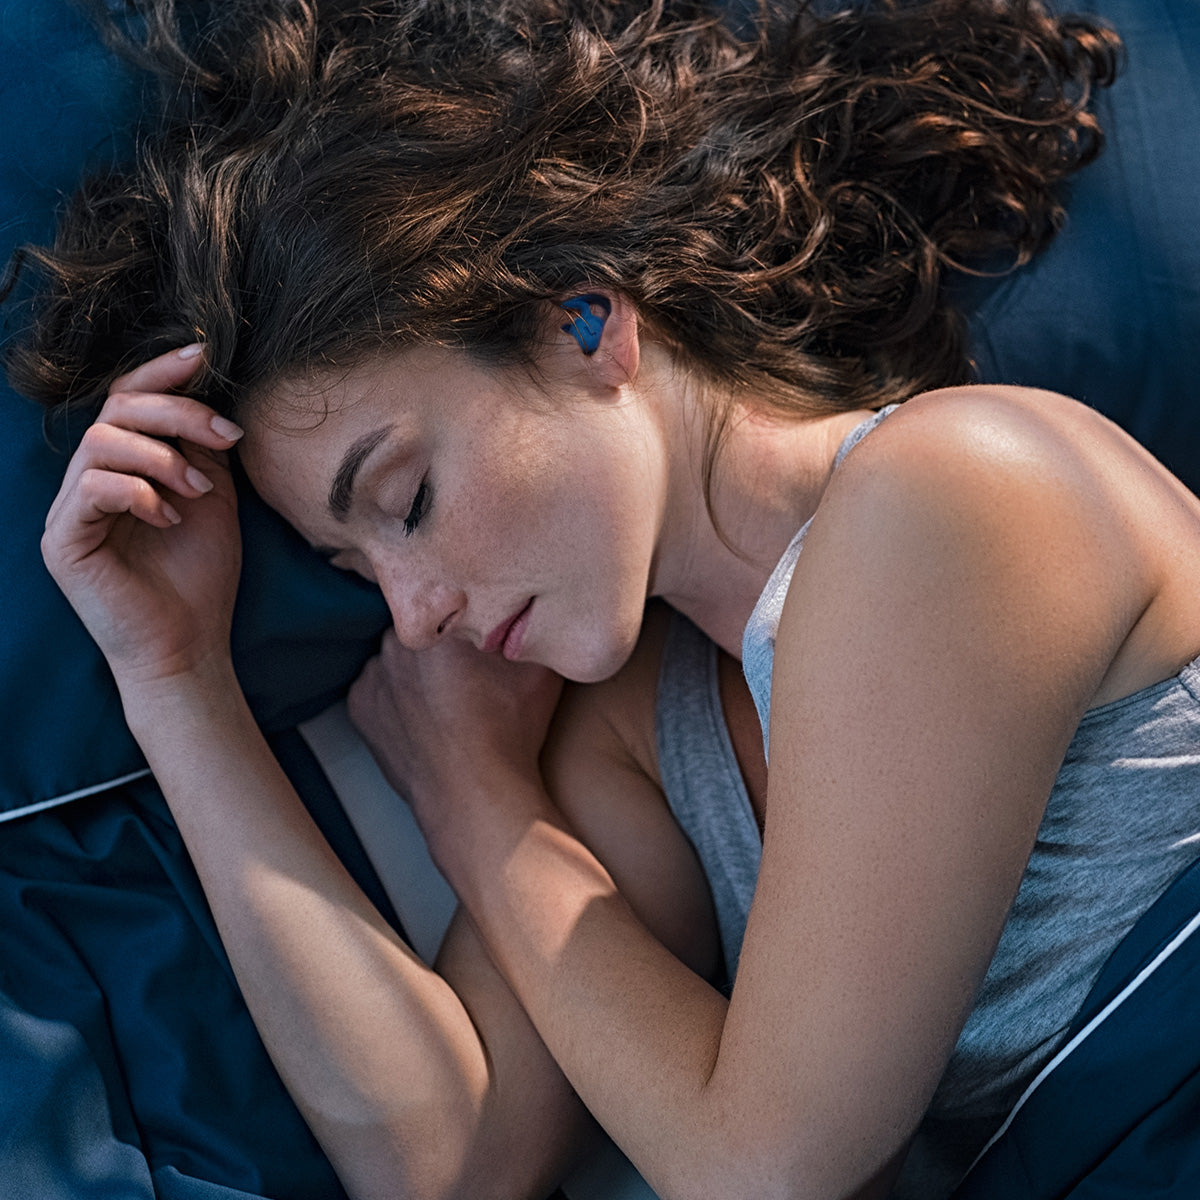 ADV. Eartune Dream U Sleep Ear Plugs for Medidation, Relaxation, Snoring Husband #color_navy